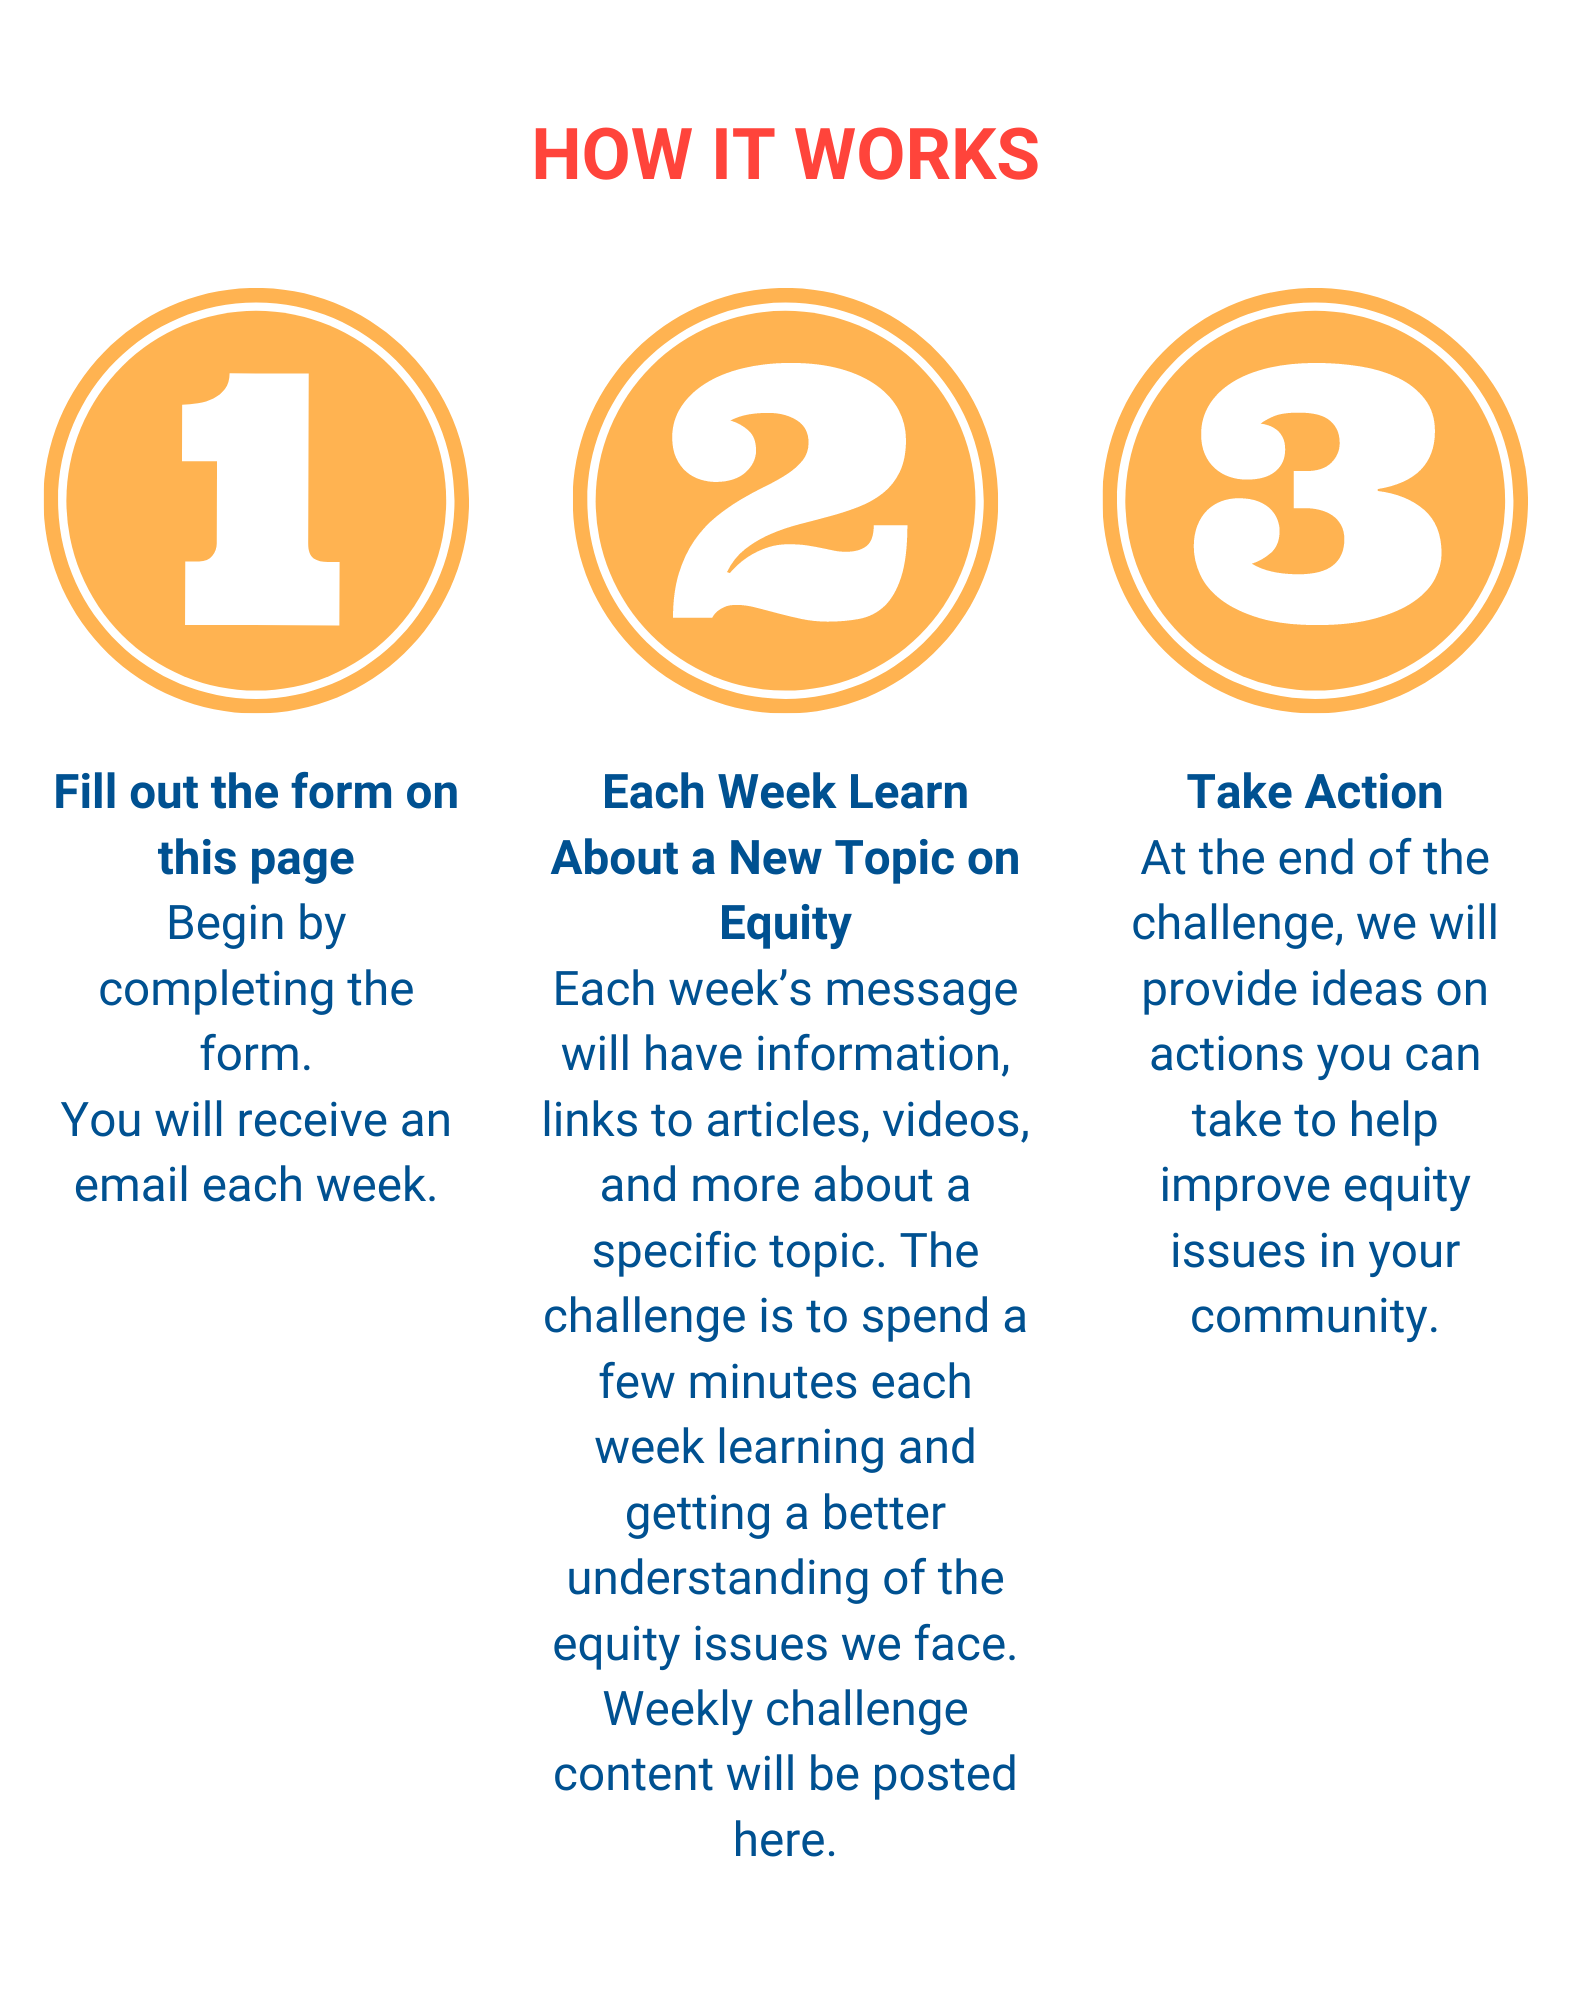 Equity steps